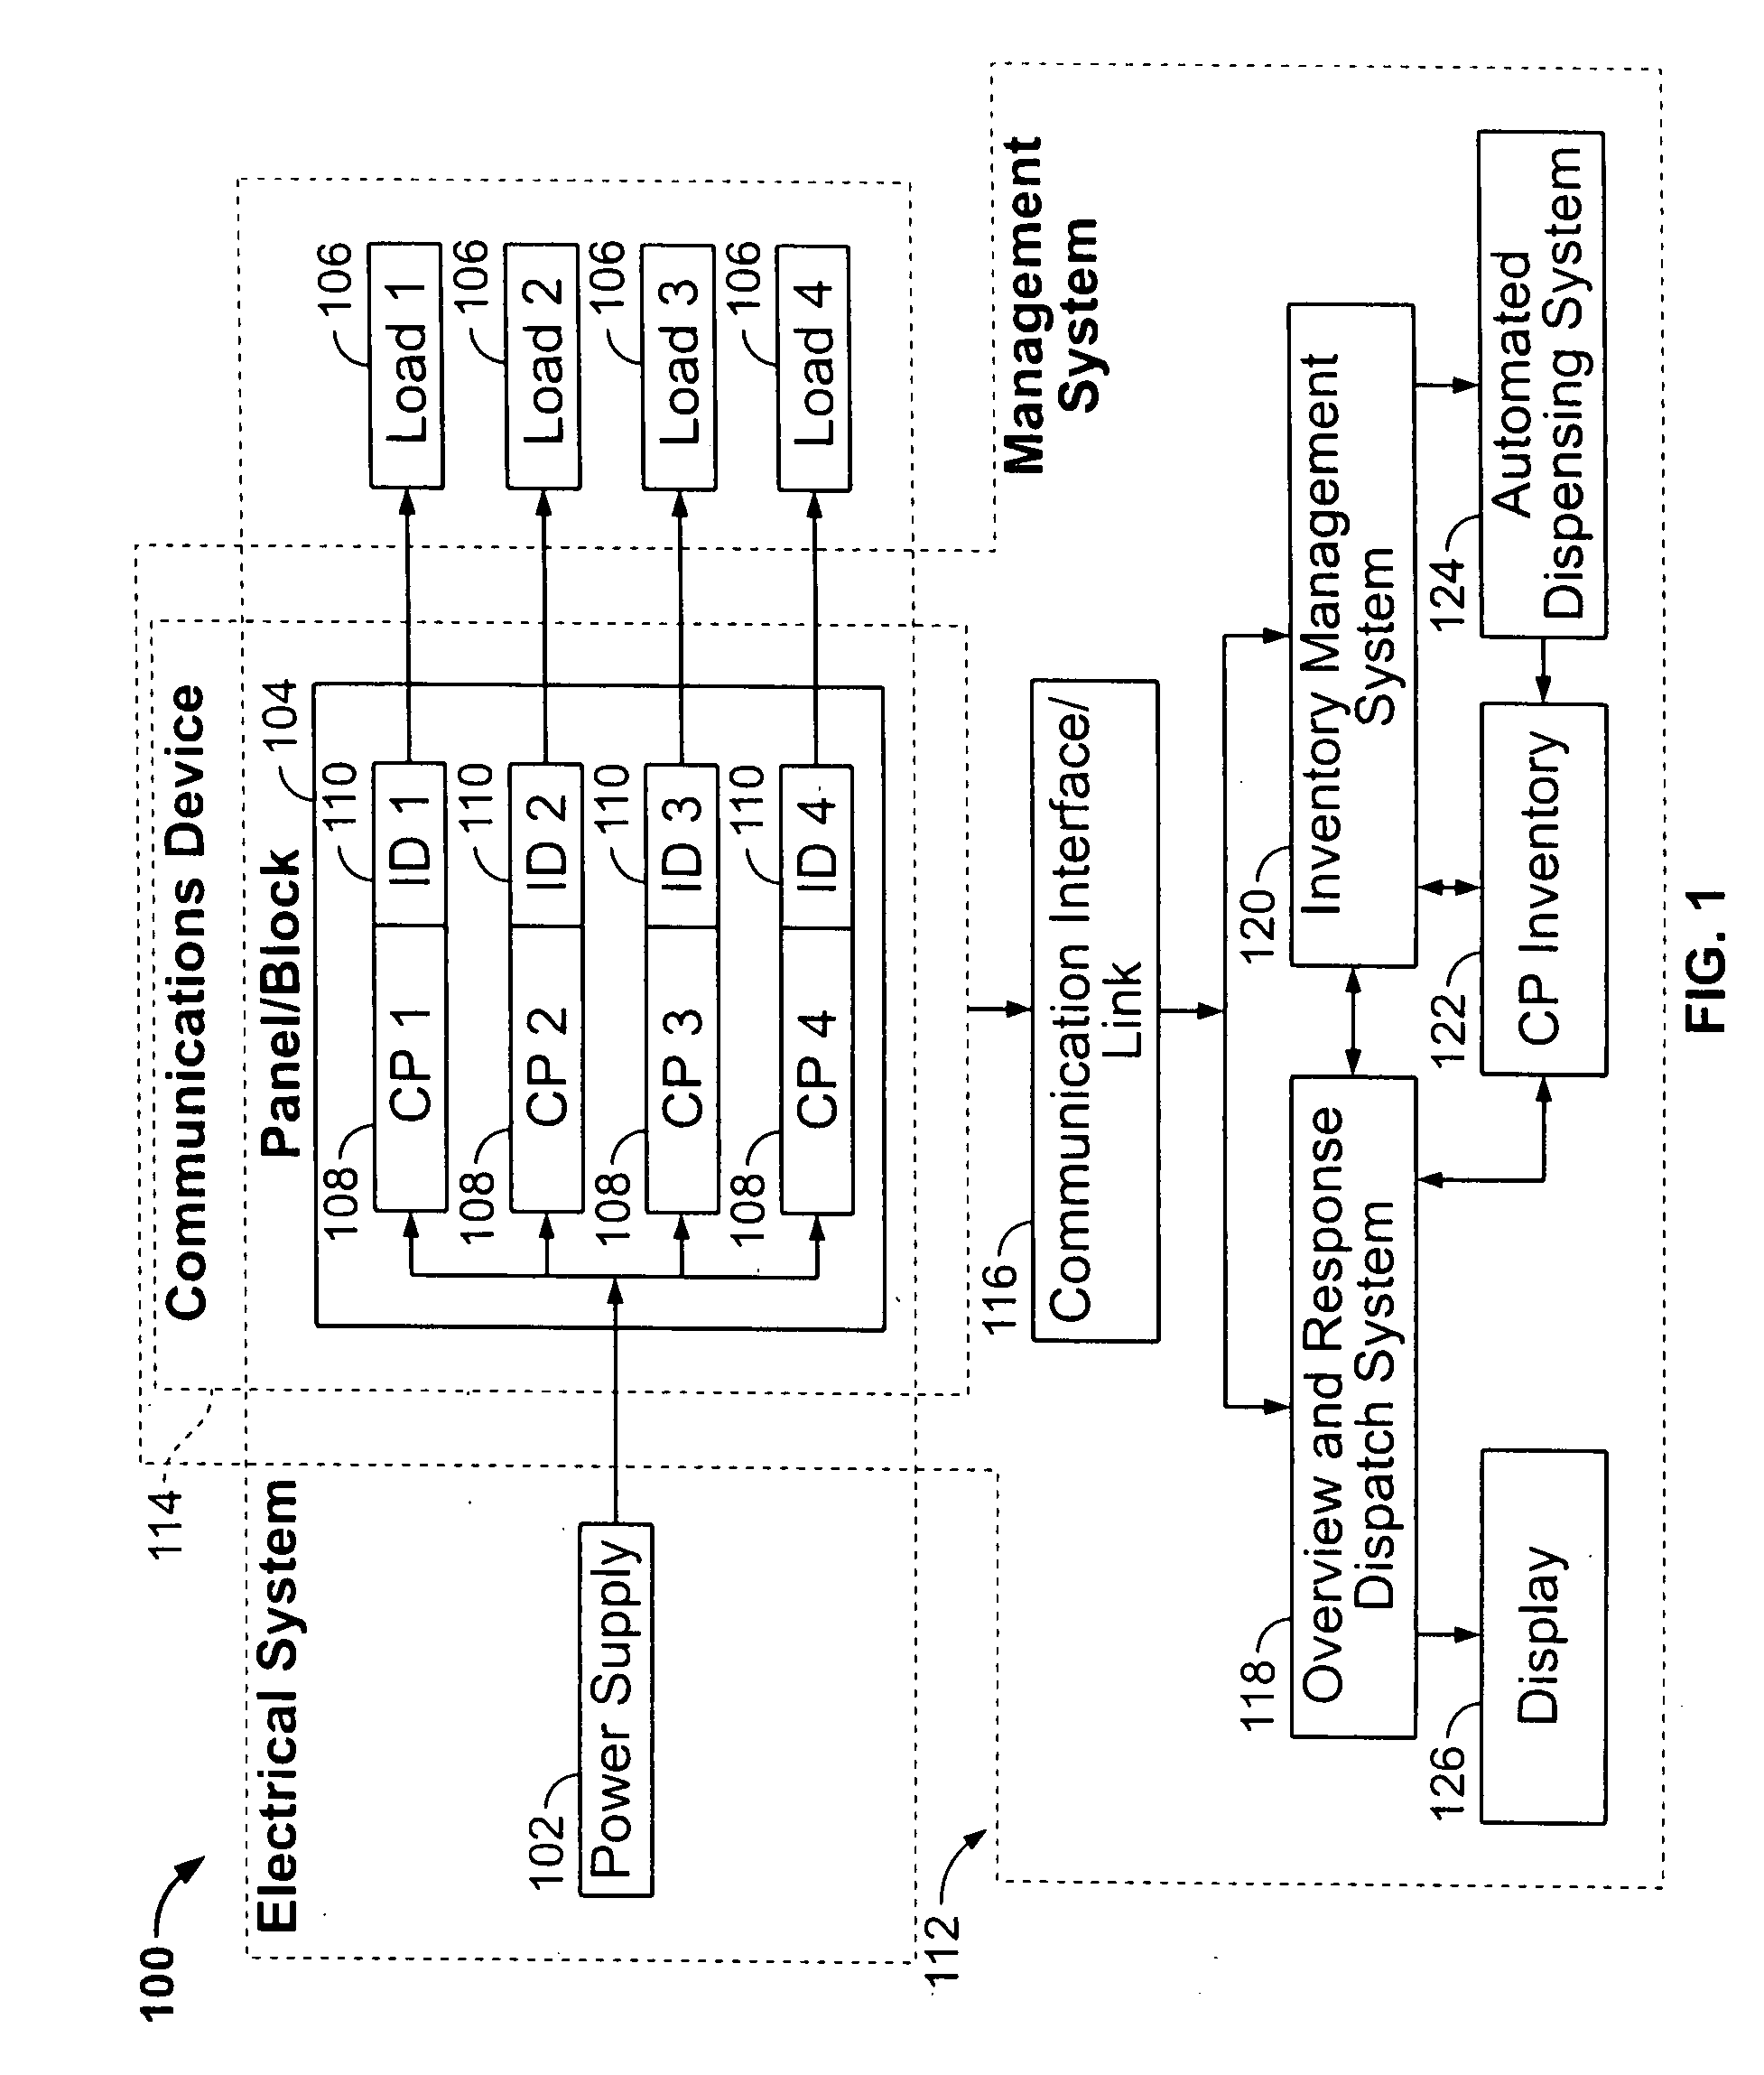 Circuit protector monitoring assembly, system and method